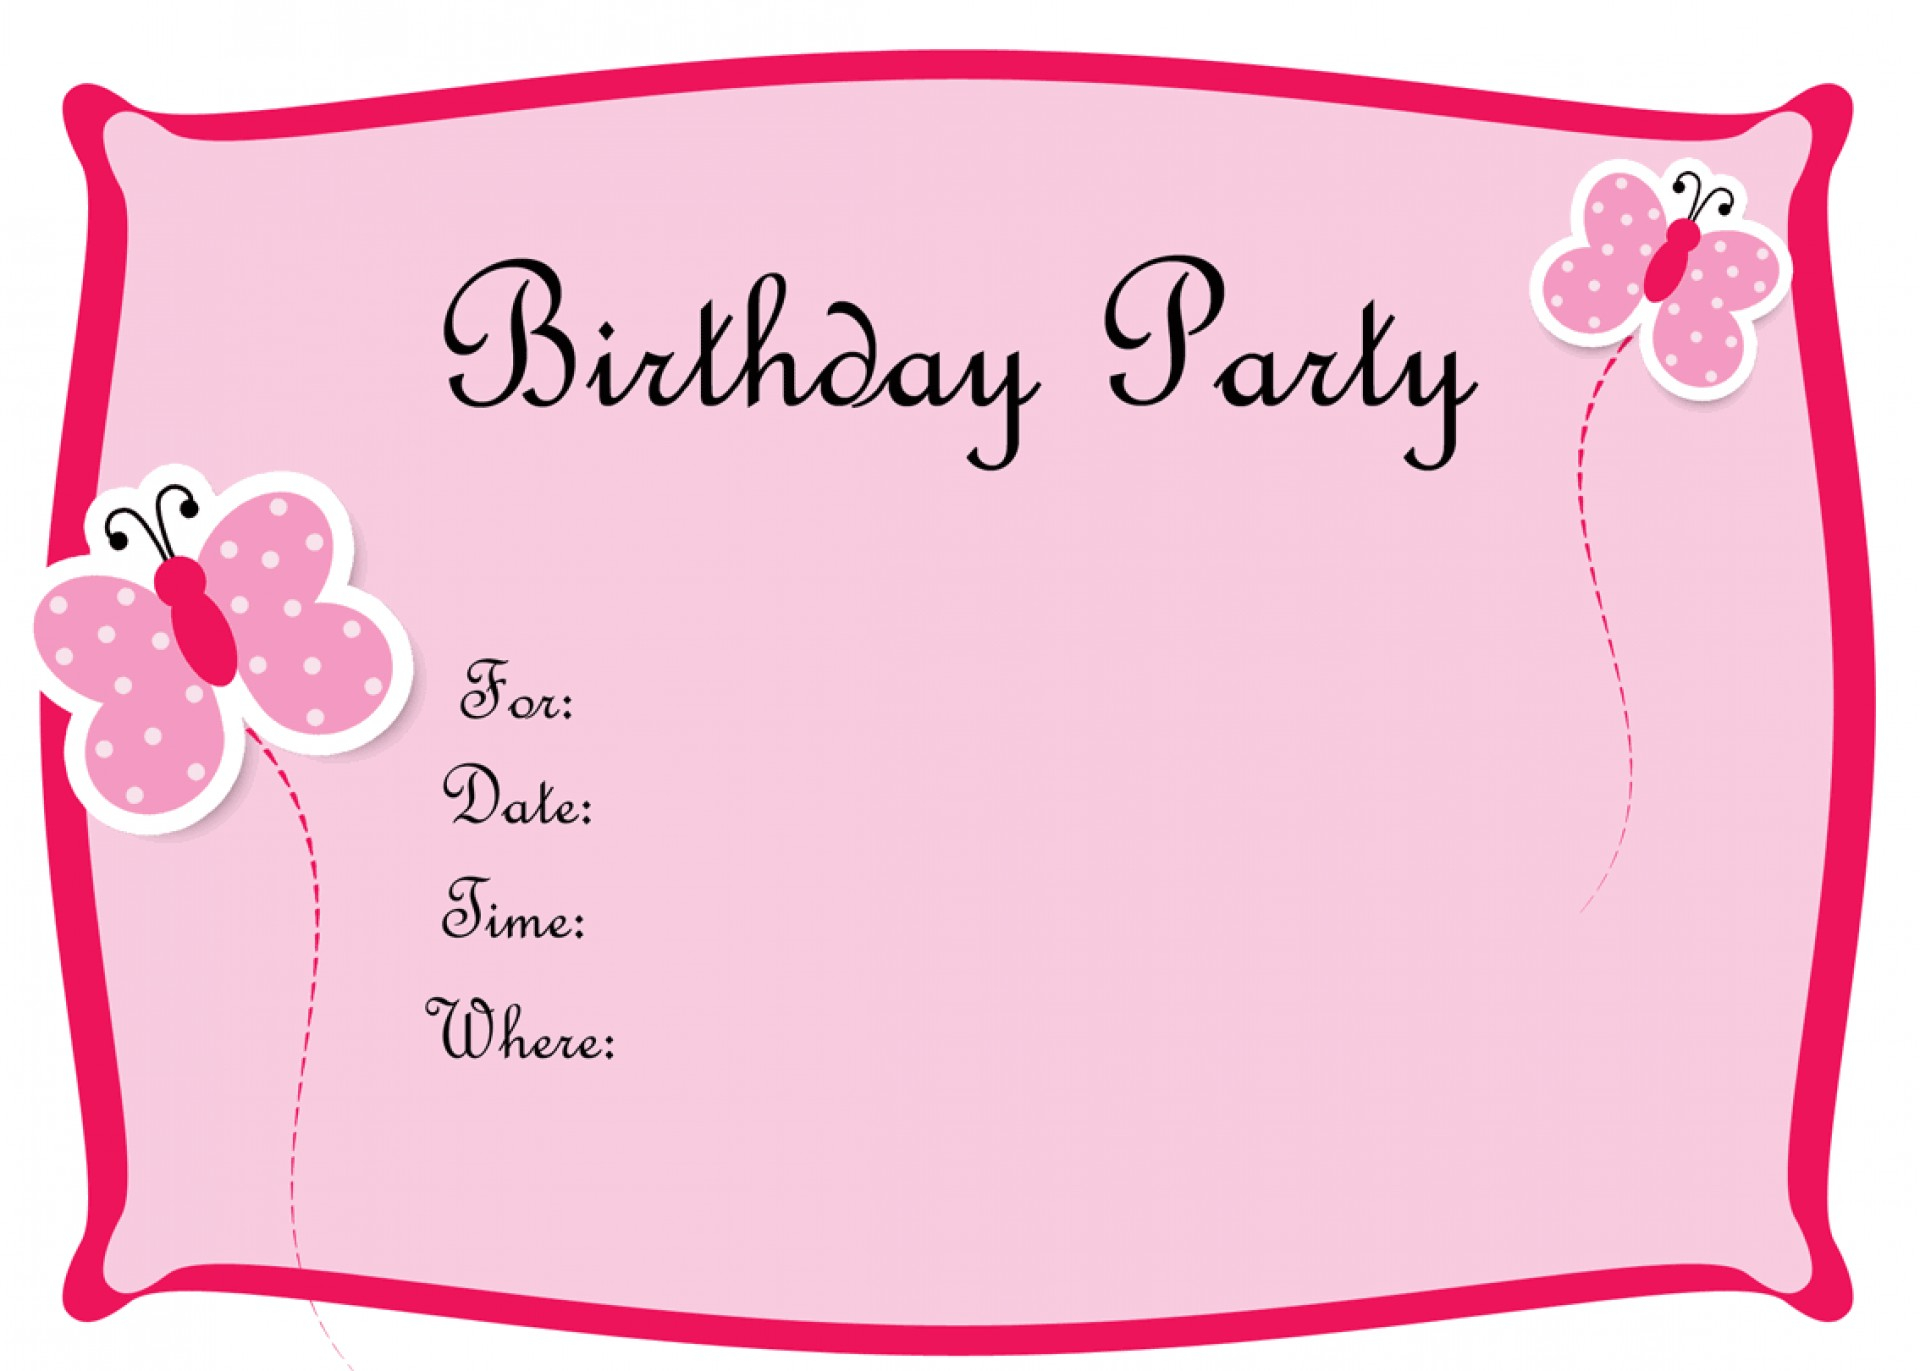 Ideas For Birthday Invitation Cards 011 Template Ideas Birthday Invitation Maker Remarkable Card For